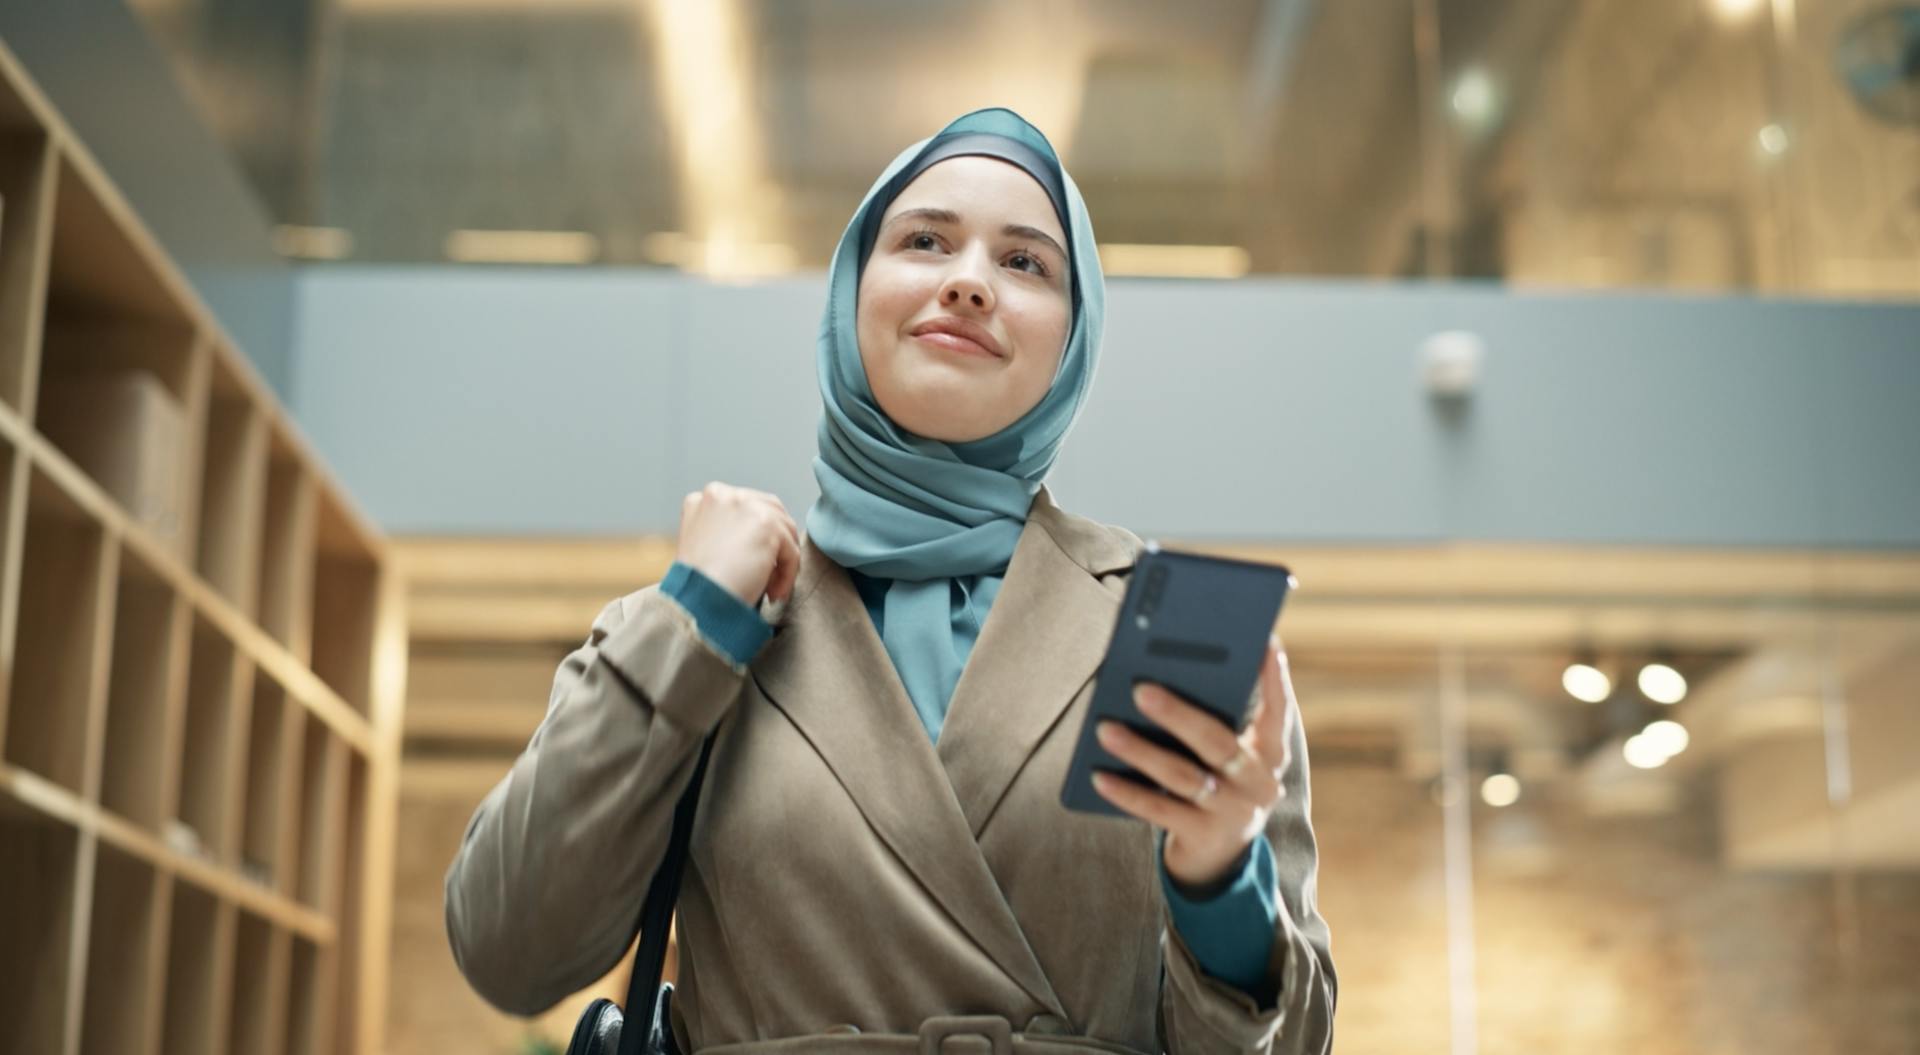 A young woman wearing a hijab walking through a modern office holding her phone